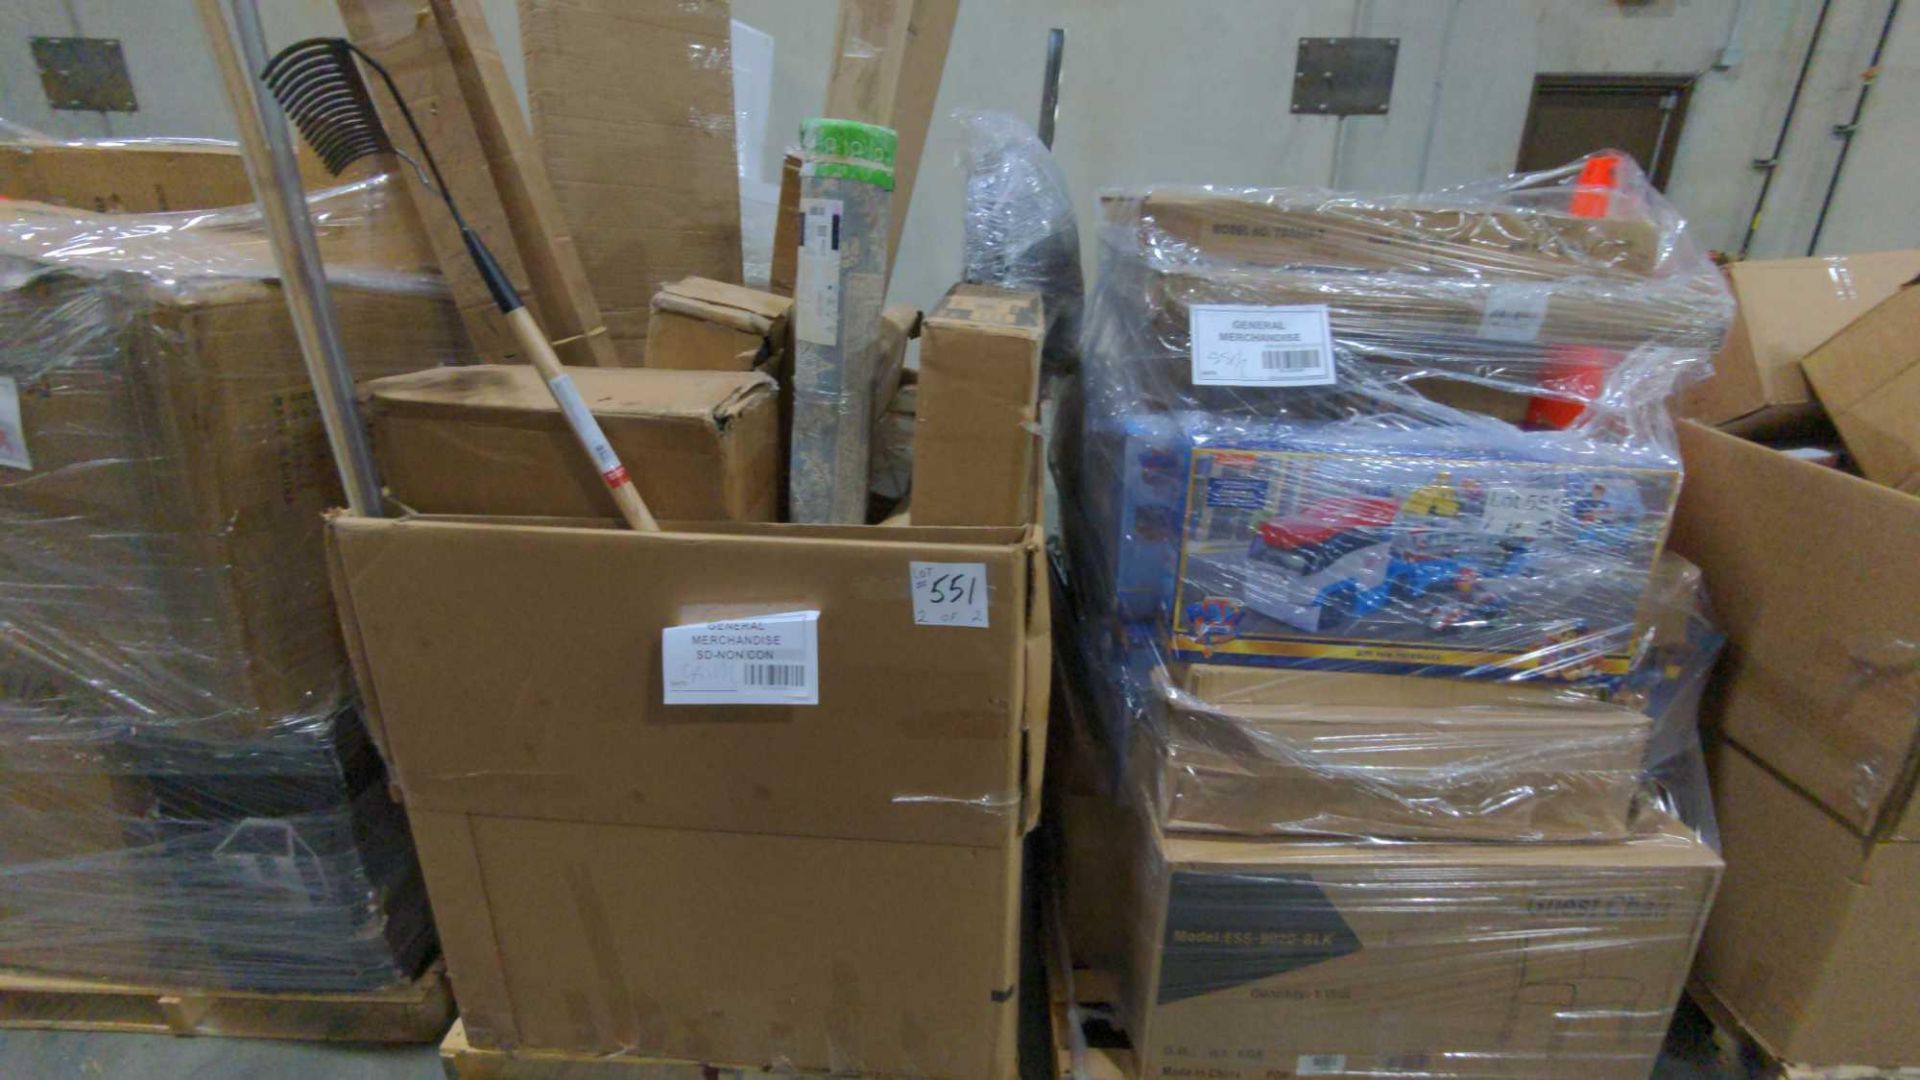 two pallets, multiple paw patrol City, paw patroller chairs, talls rugs and more